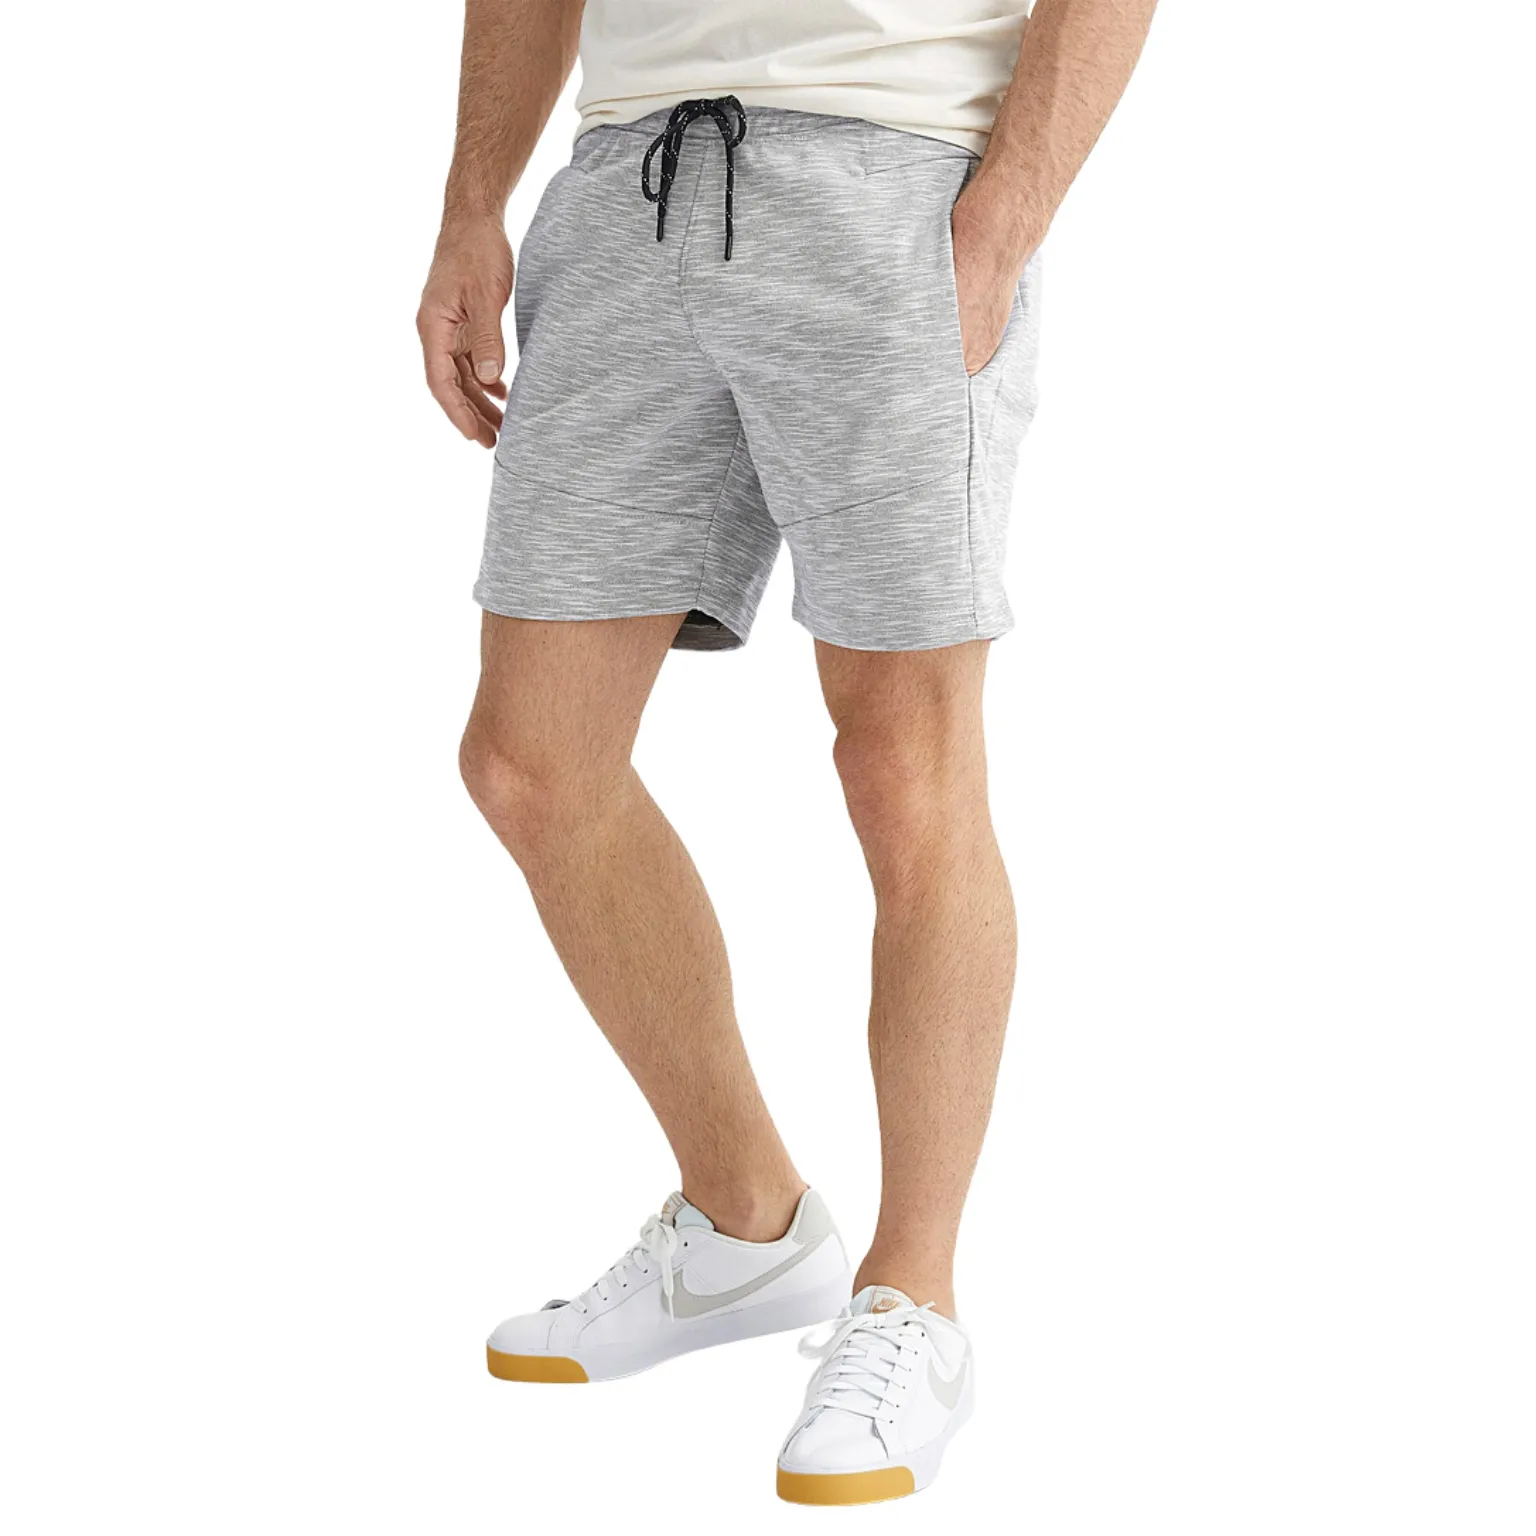 Sports Shorts manufacturing with trendy design